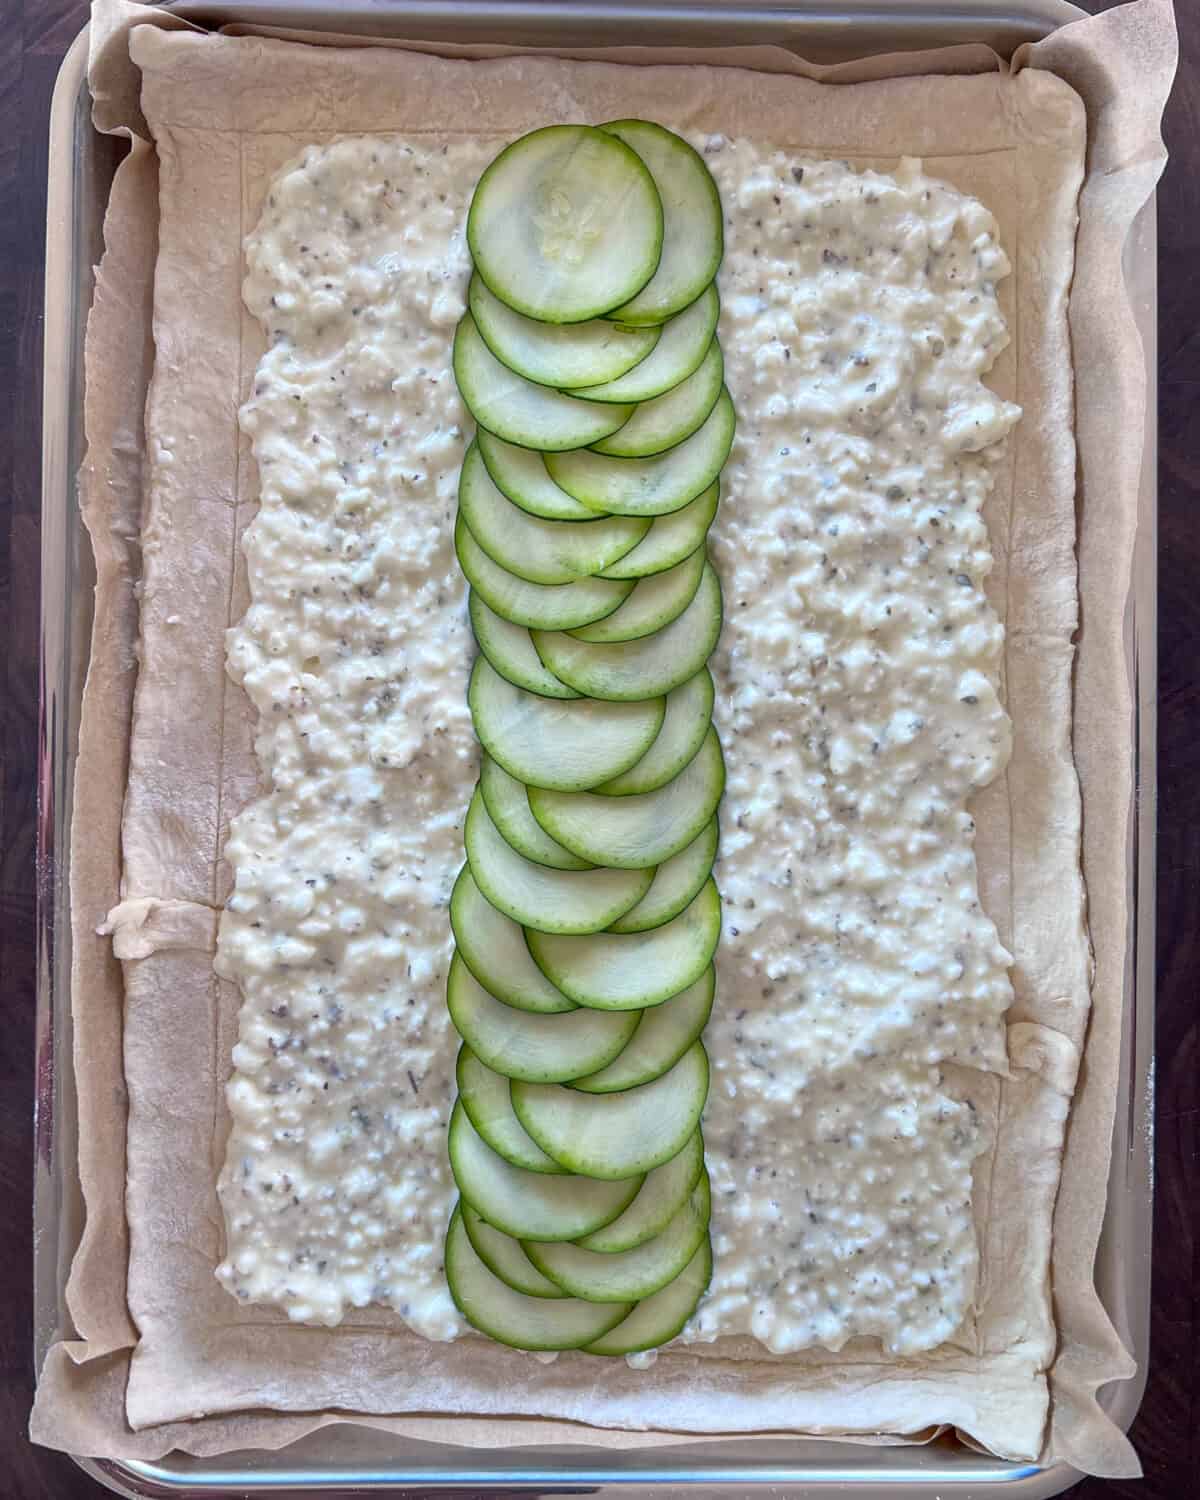 A row of zucchini laid over the cheese layer on the puff pastry.